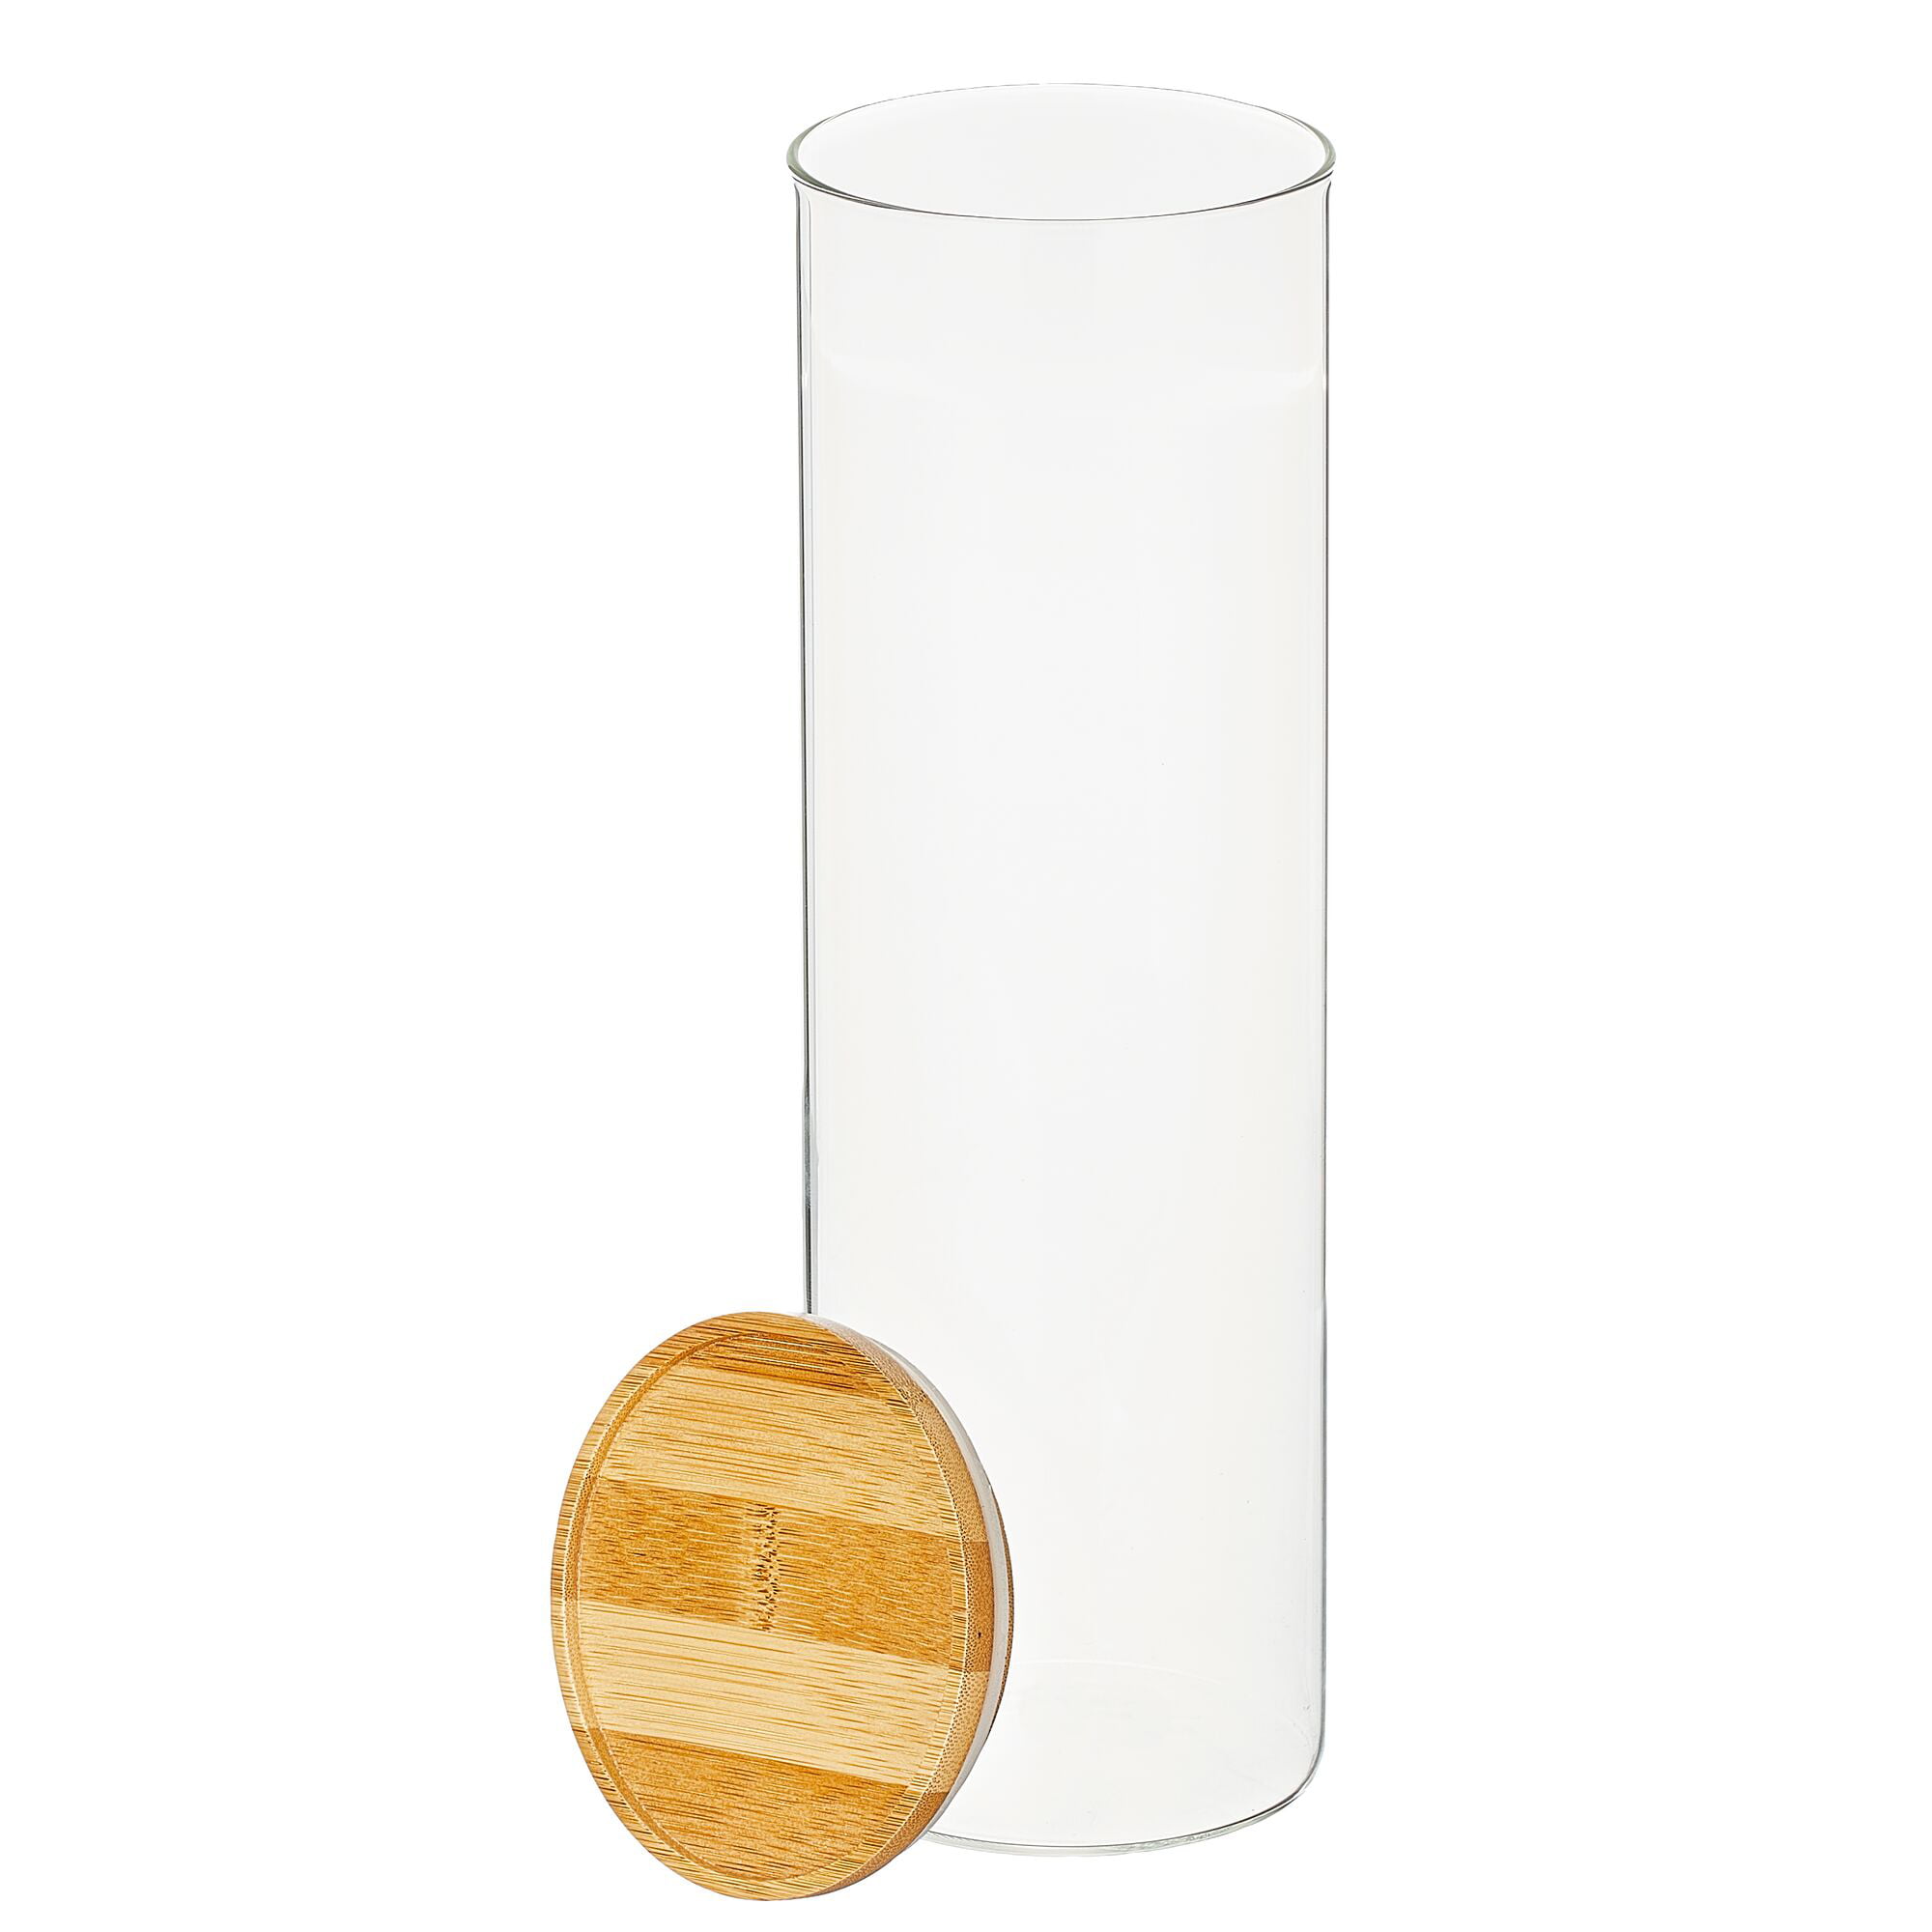 Extra-Large Round Glass Storage Container with Bamboo Lid +